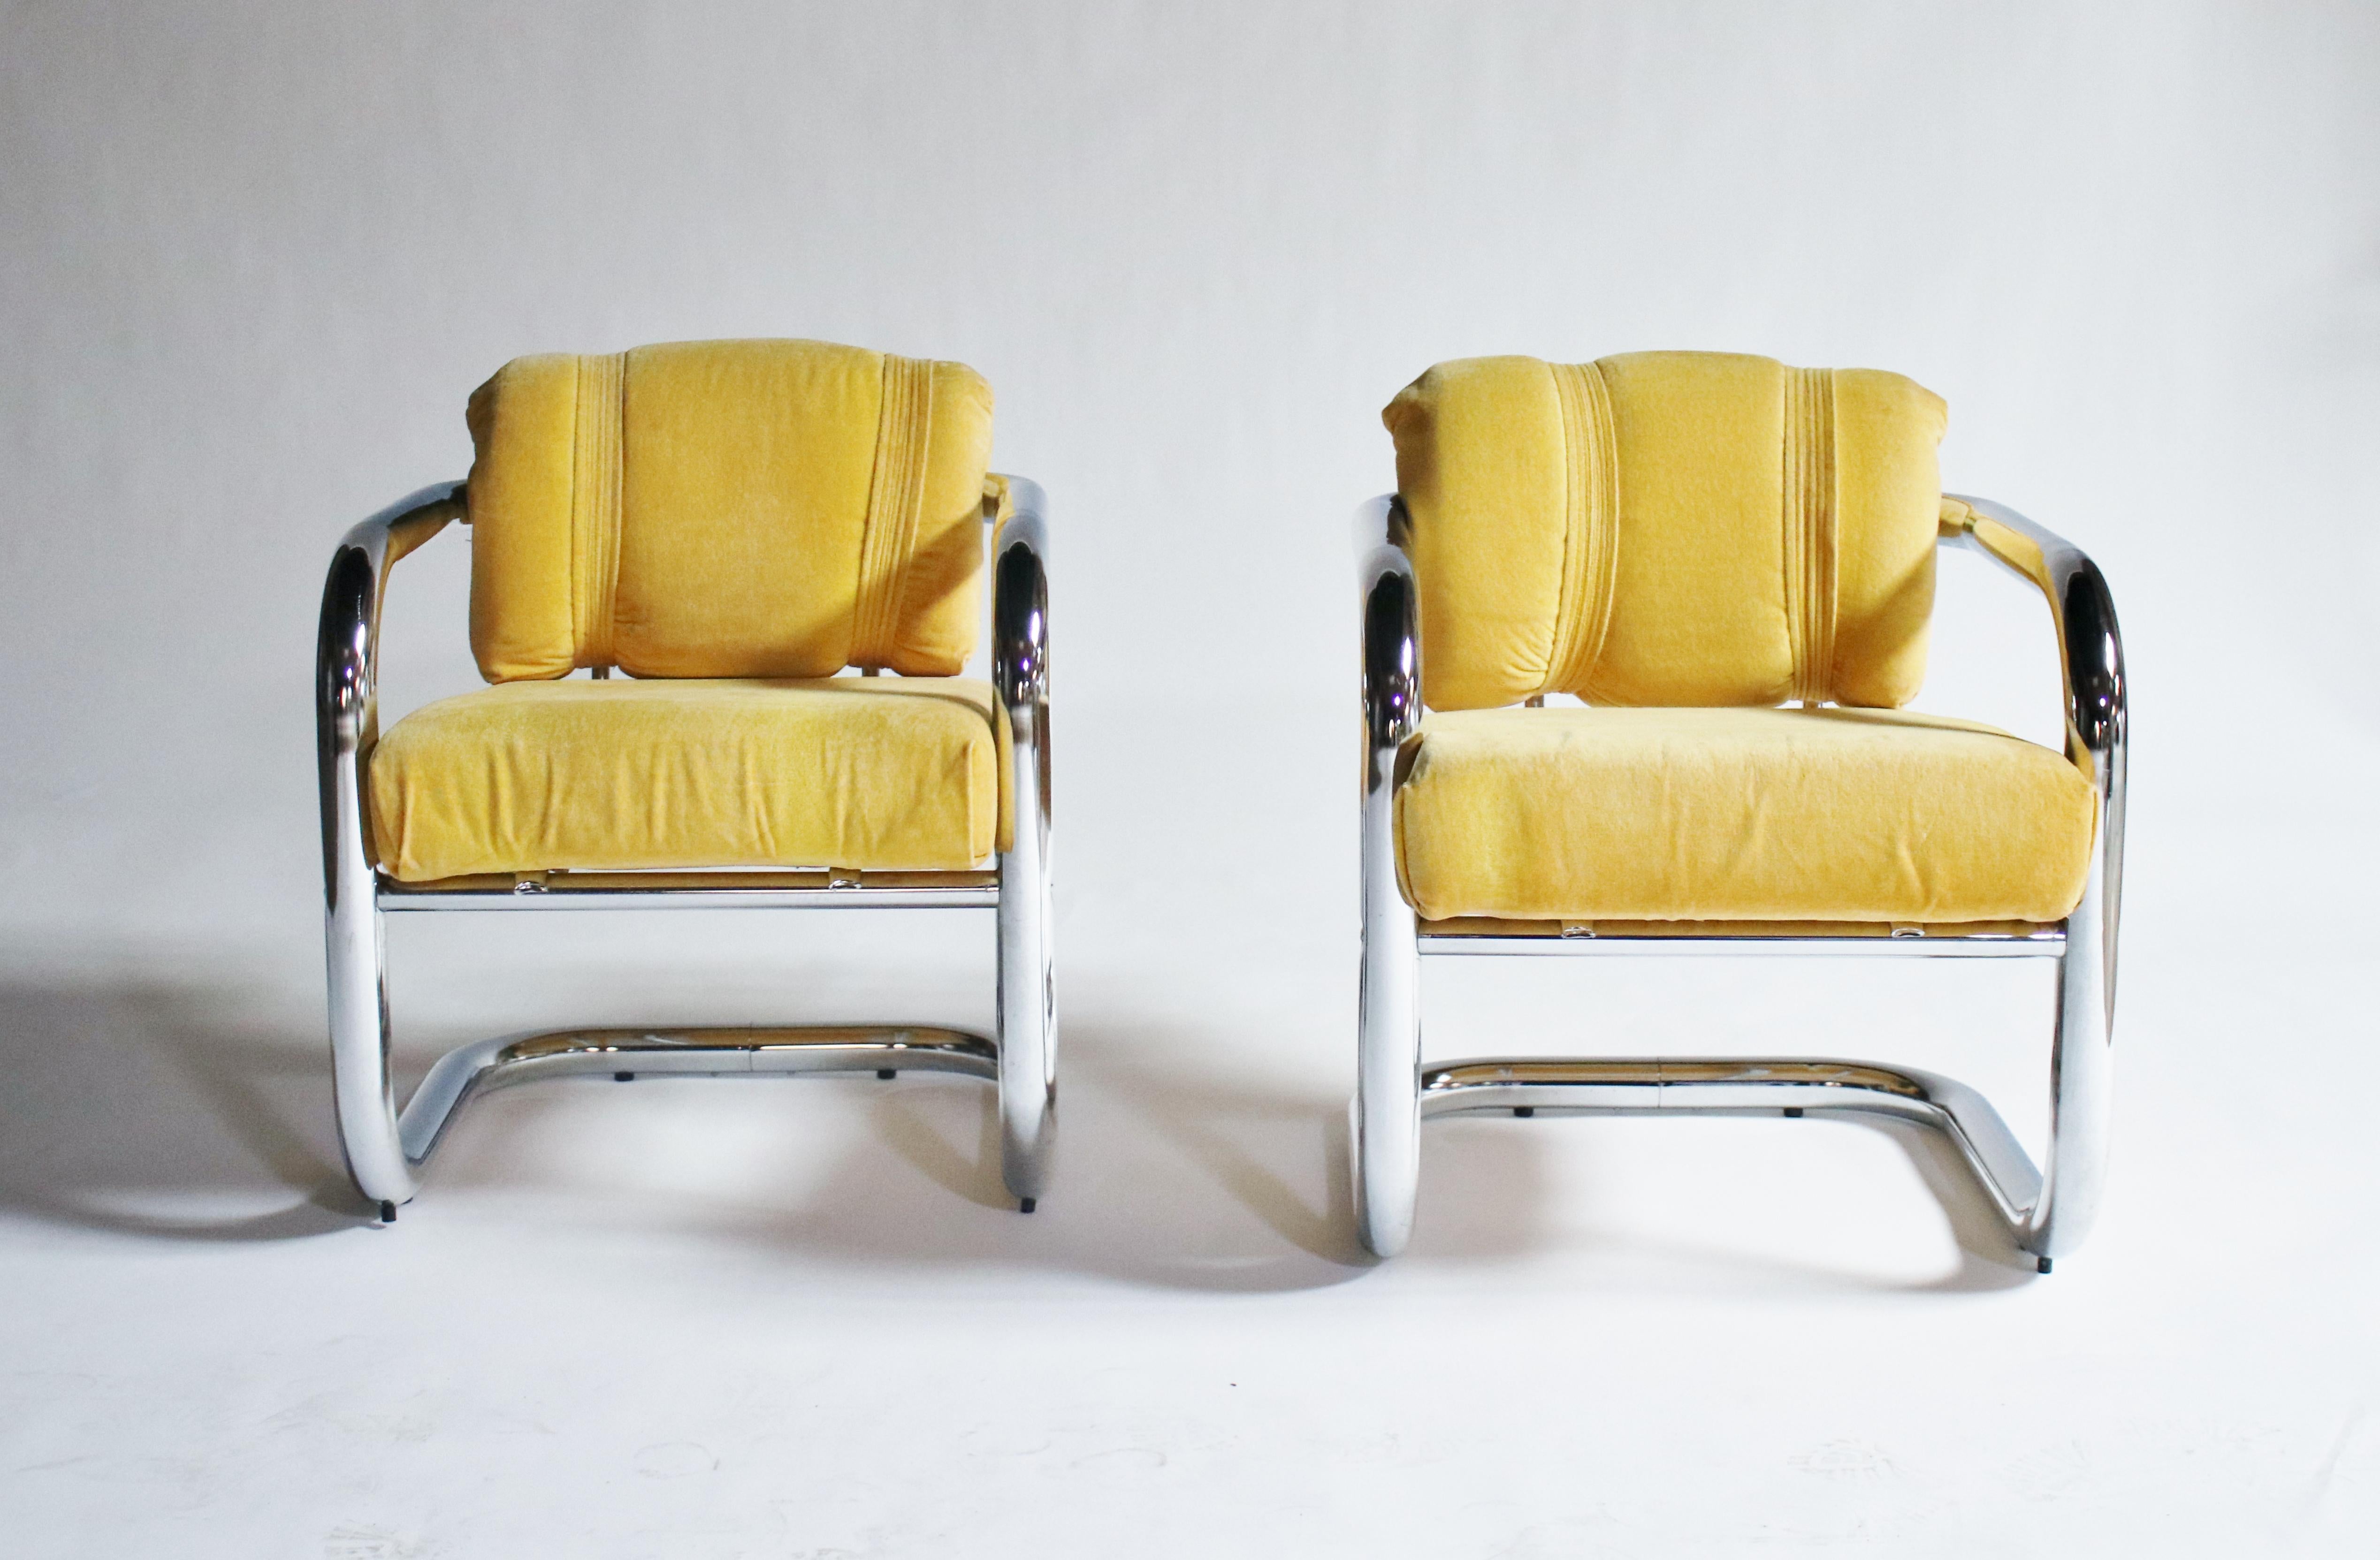 Pair of all 1970s tubular chrome cantilevered armchairs attributed to John Mascheroni with all original yellow removable cushions.